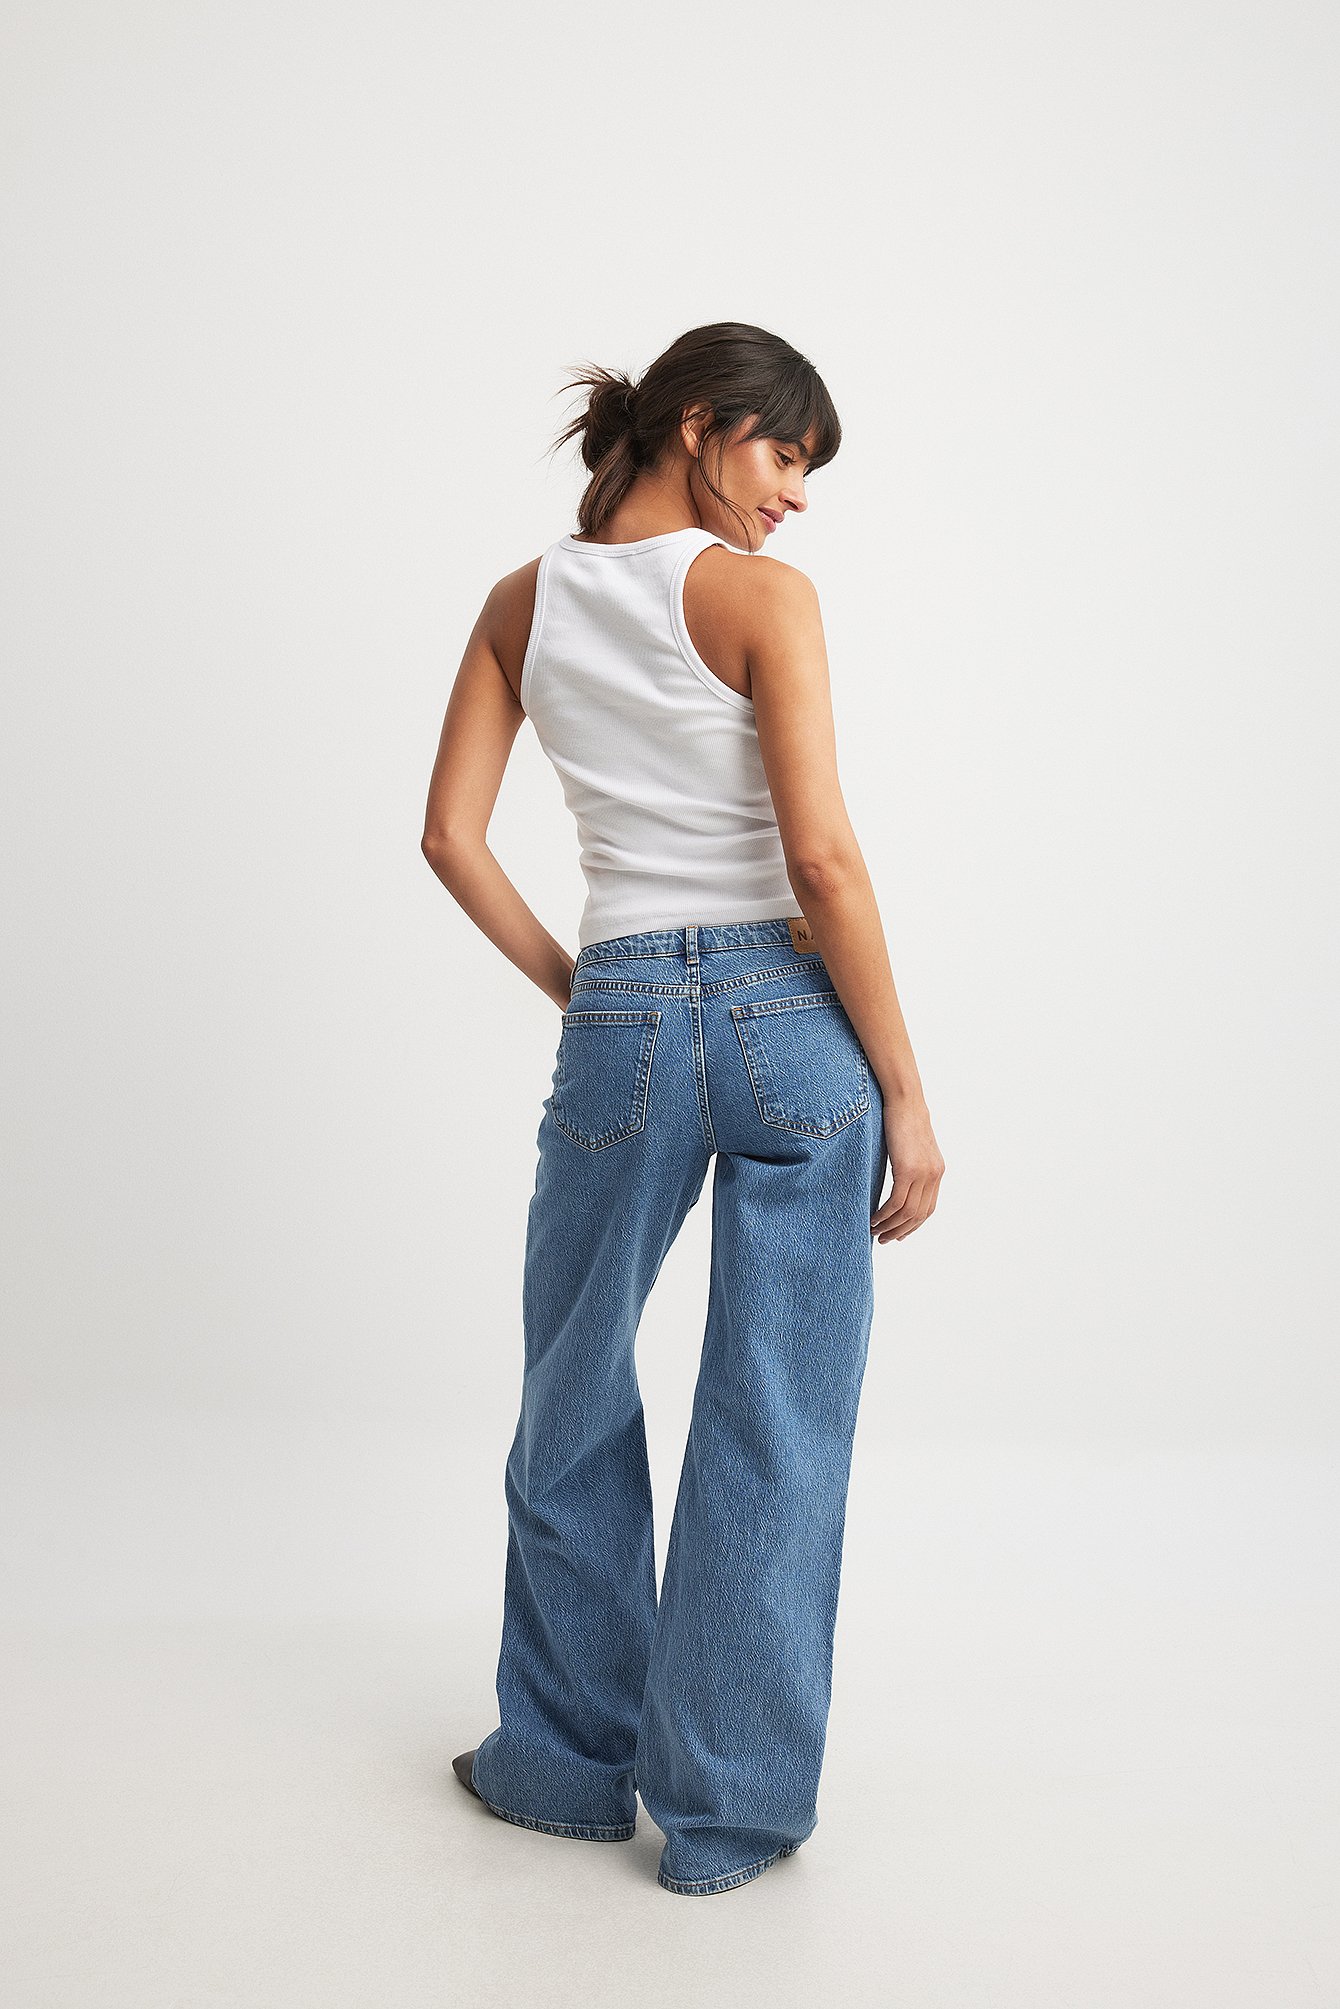 Push Up jeans by M.Sara, styled by Levis - Polish Boutique UK / Polish  Clothes